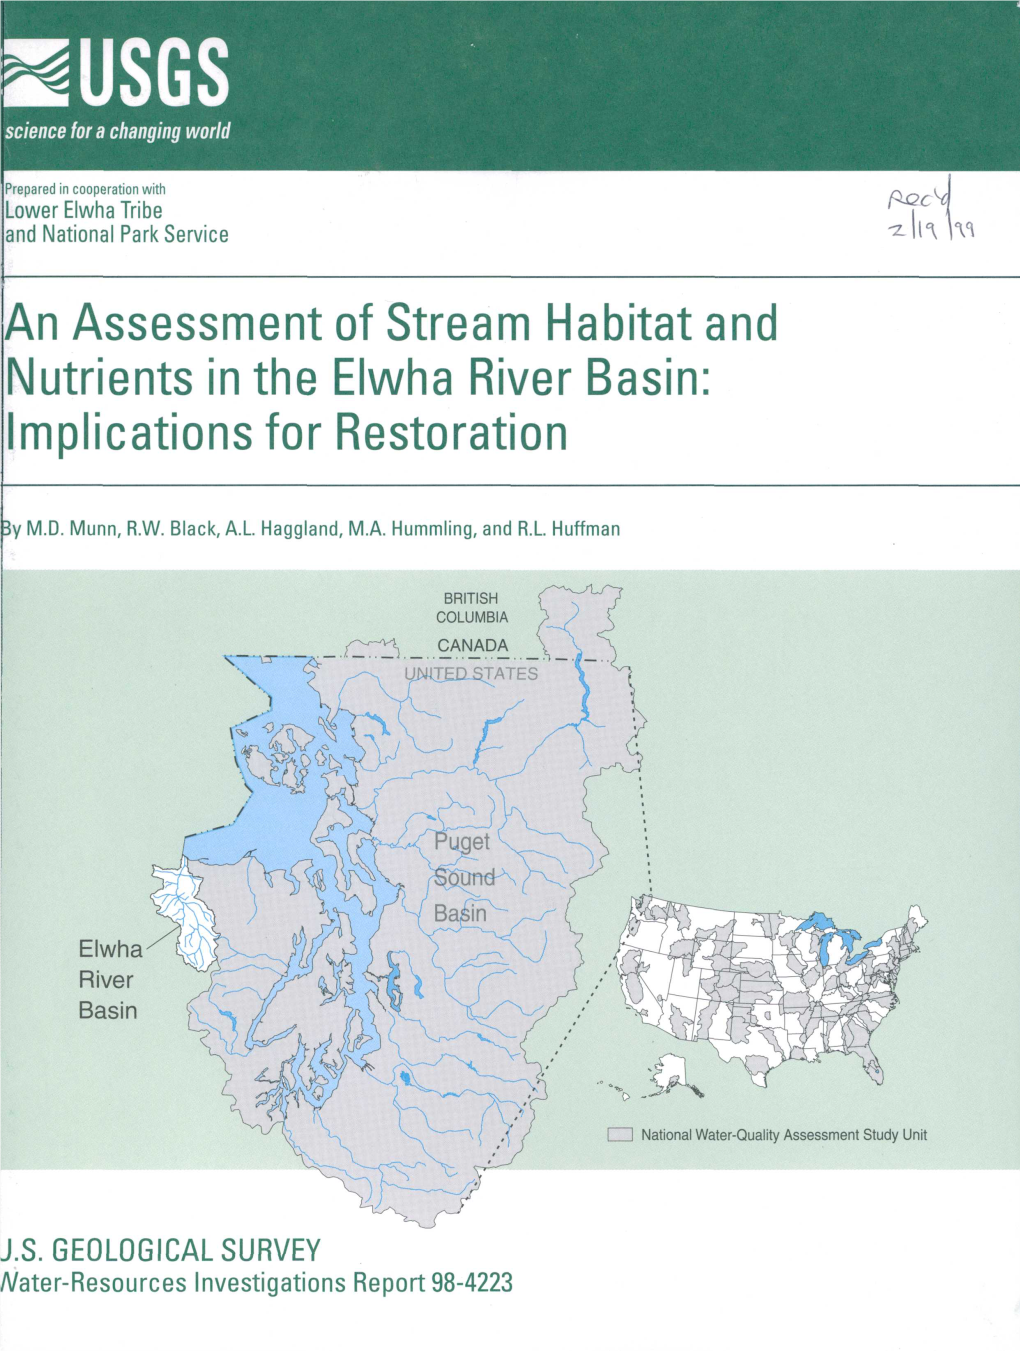 An Assessment of Stream Habitat and Nutrients in the Elwha River Basin: Implications for Restoration